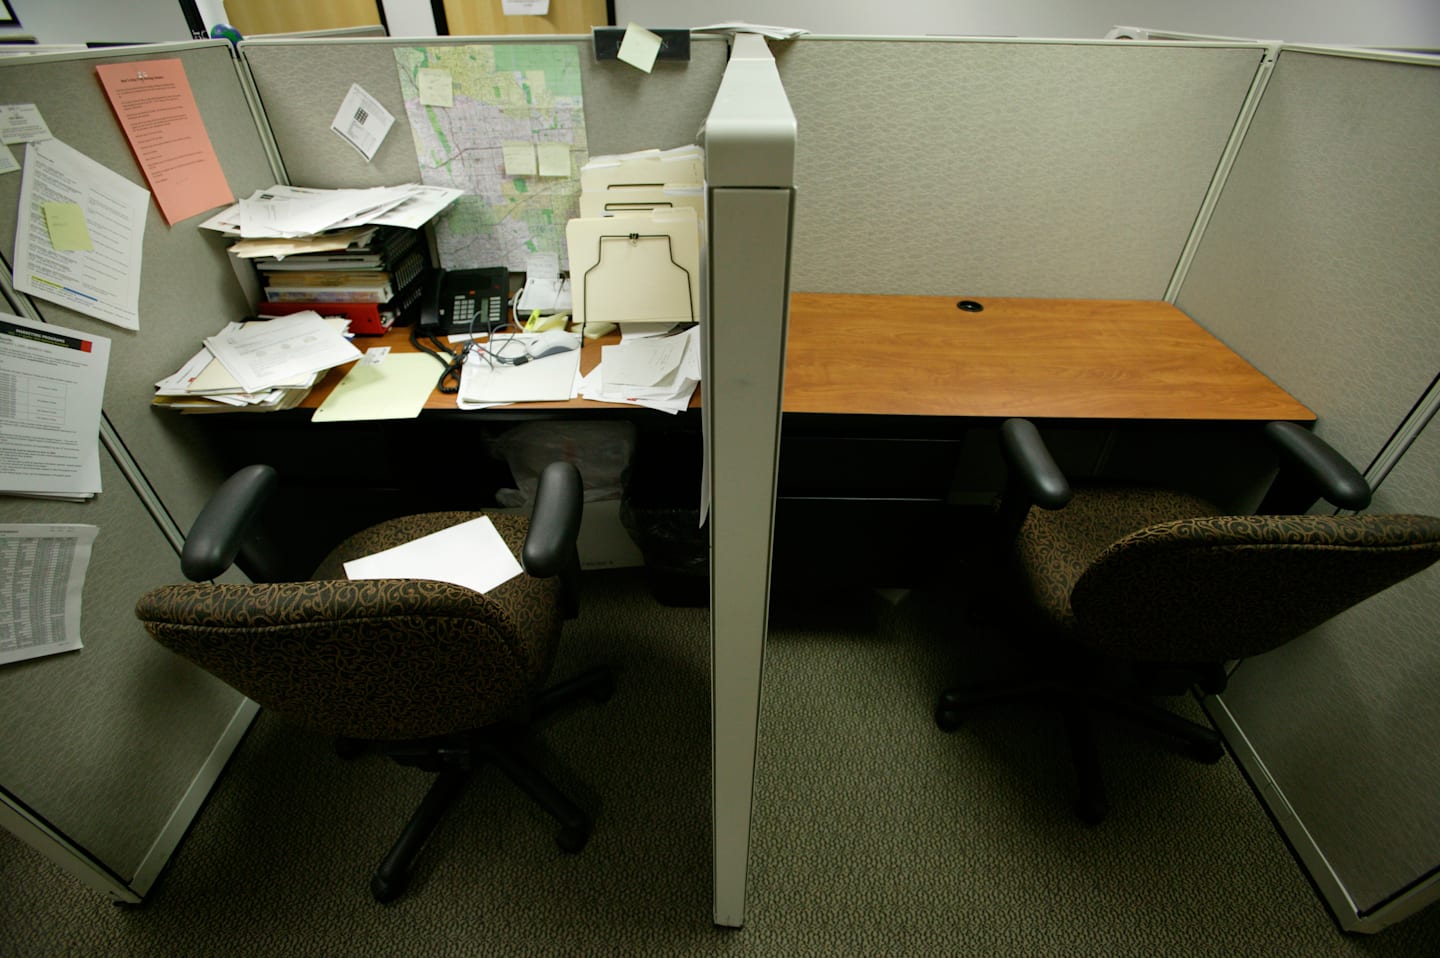 Cluttered desk next to an empty desk in office setting.